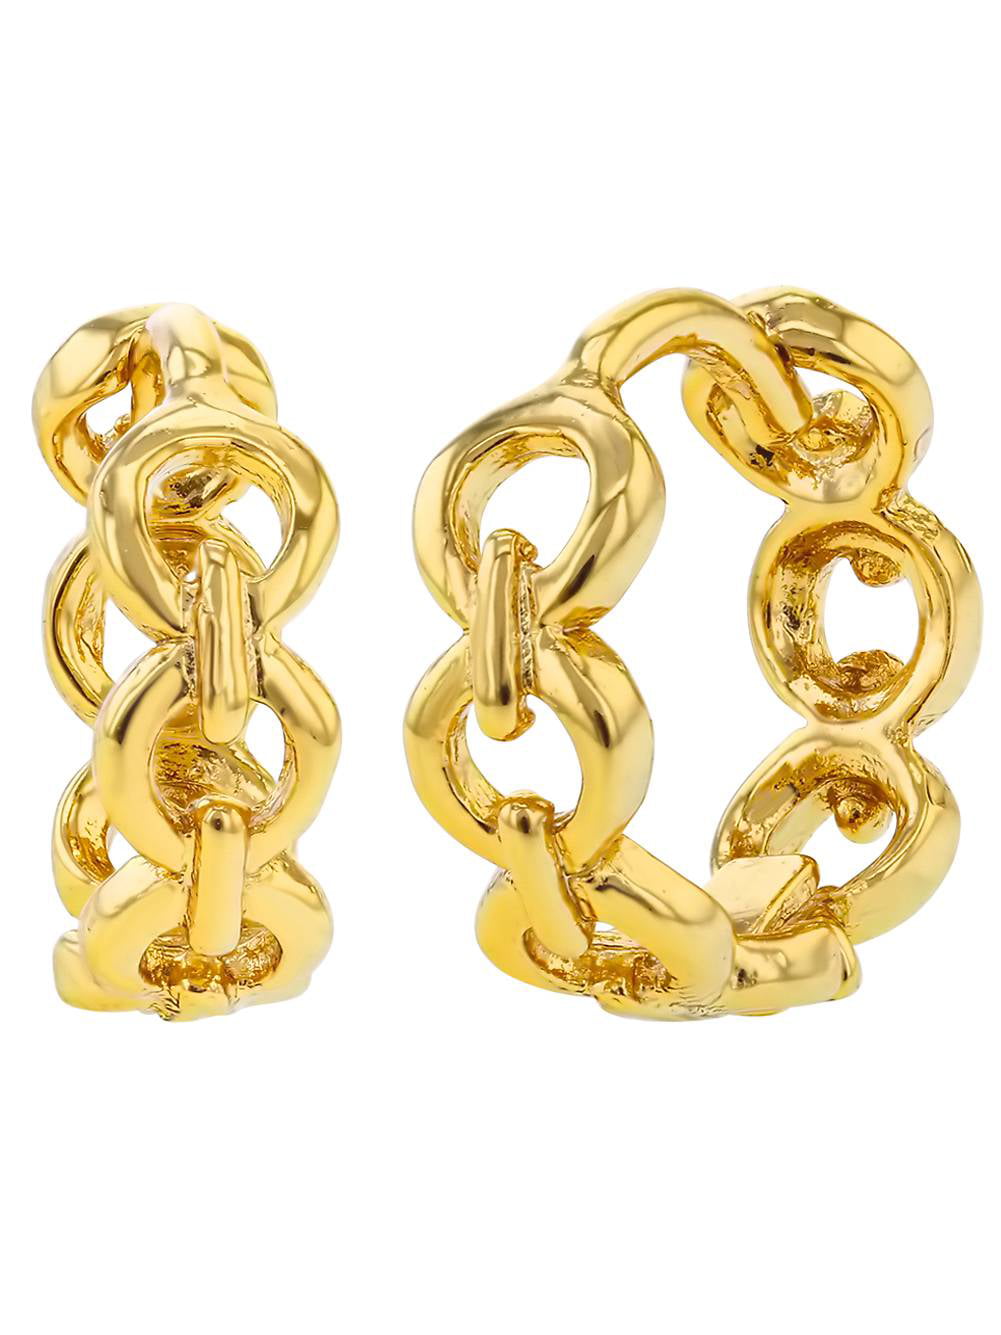 24K Yellow Gold Plated Womens Clear Crystal Lever Back Huggie Hoops Earrings Wedding Jewelry